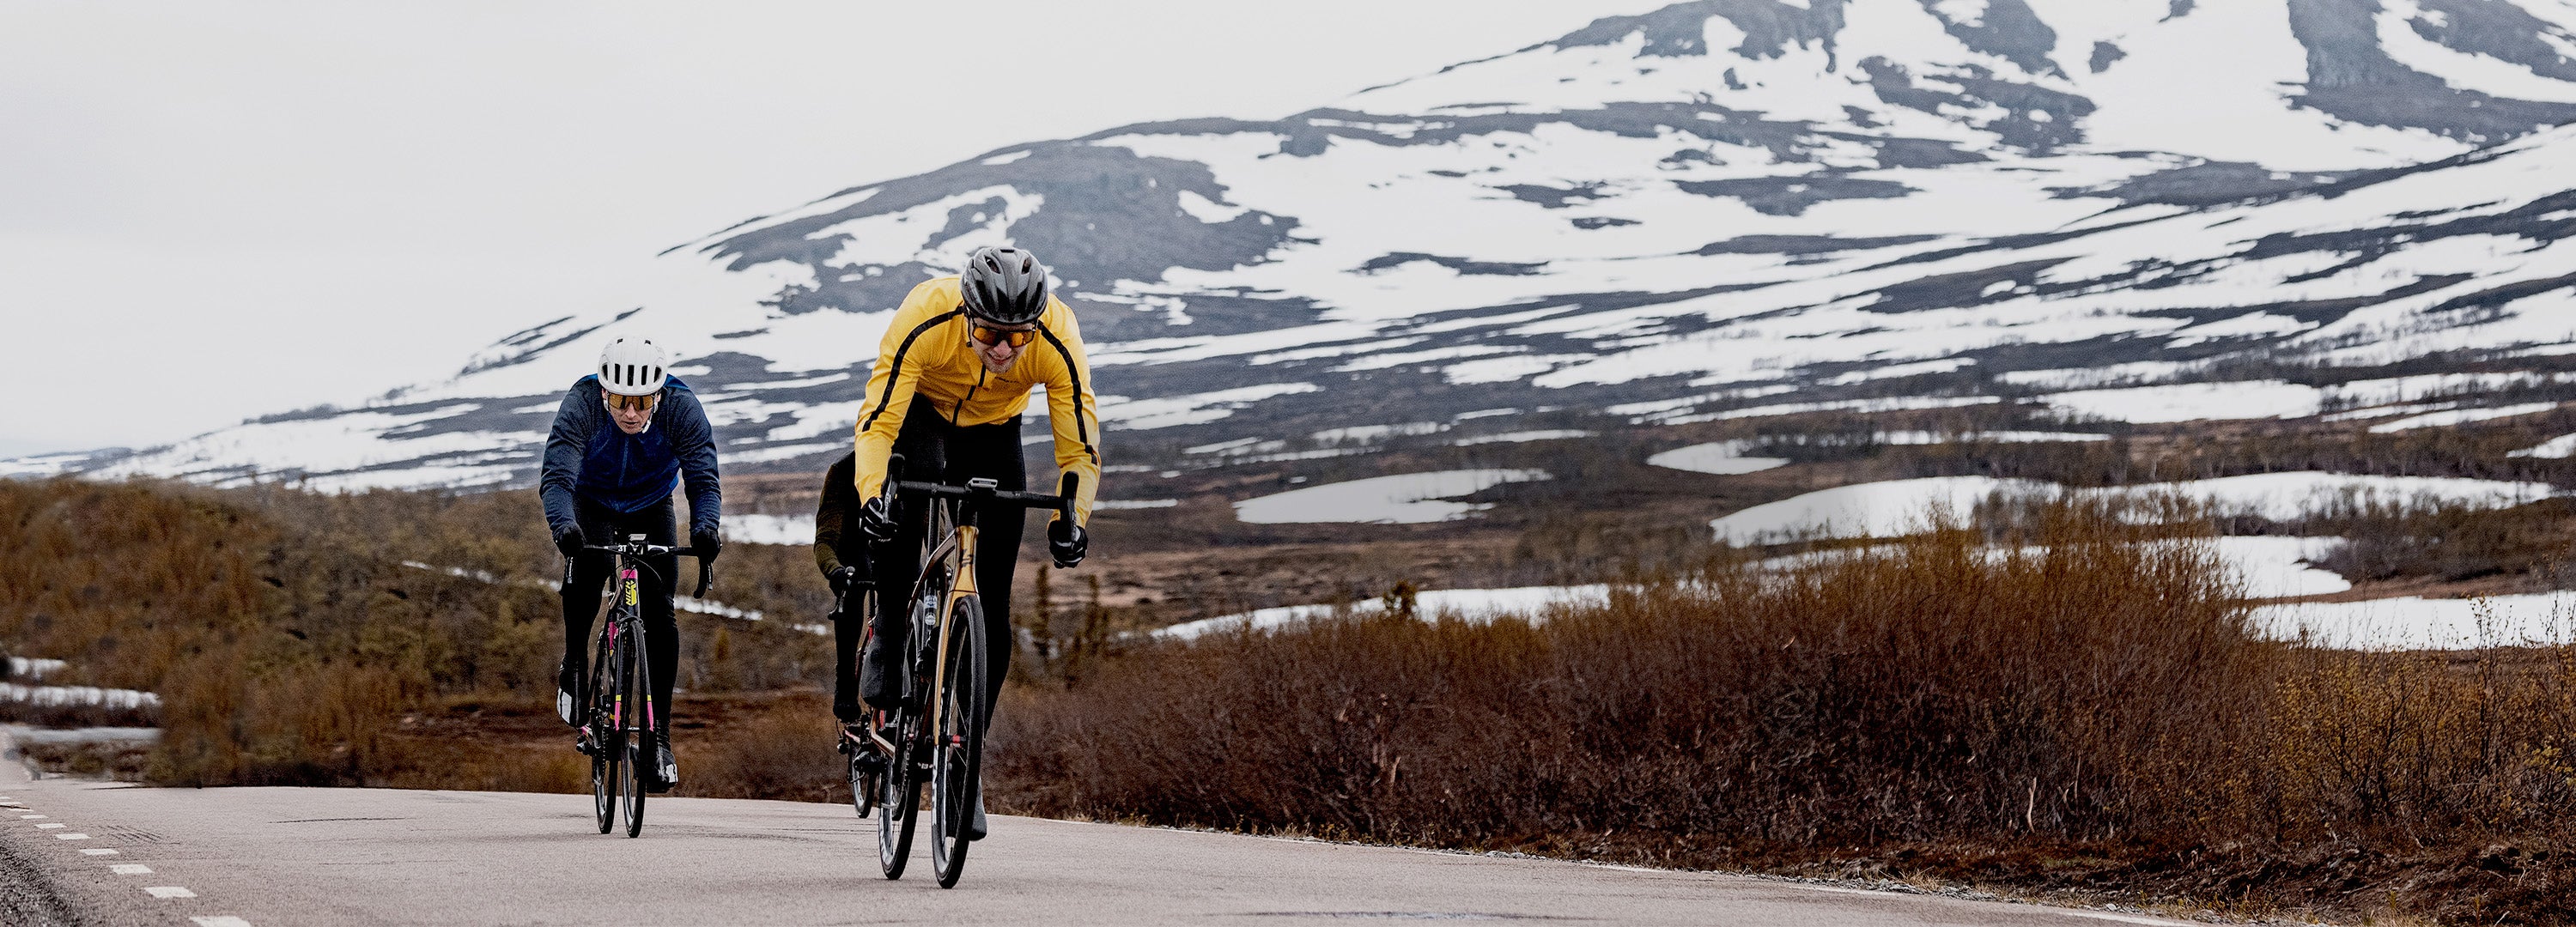 Winter cycling trousers - everything you need